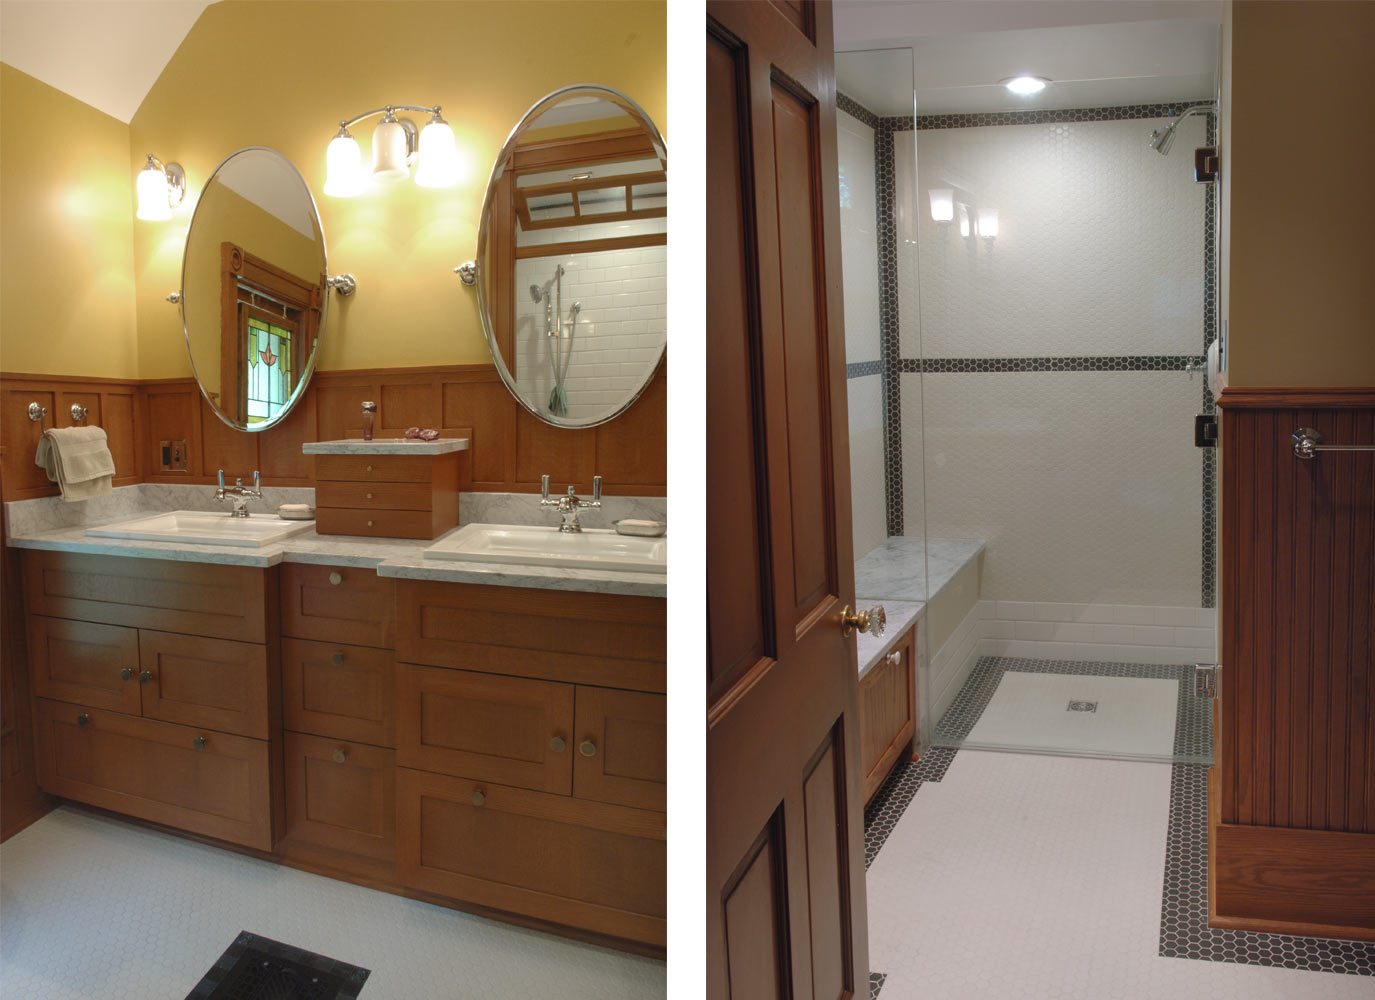 Victorian bathrooms remodeled by Silent Rivers Design+Build of Des Moines, Iowa feature custom cabinets designed to match originals and hexagon floor tile in the shower for historic preservation